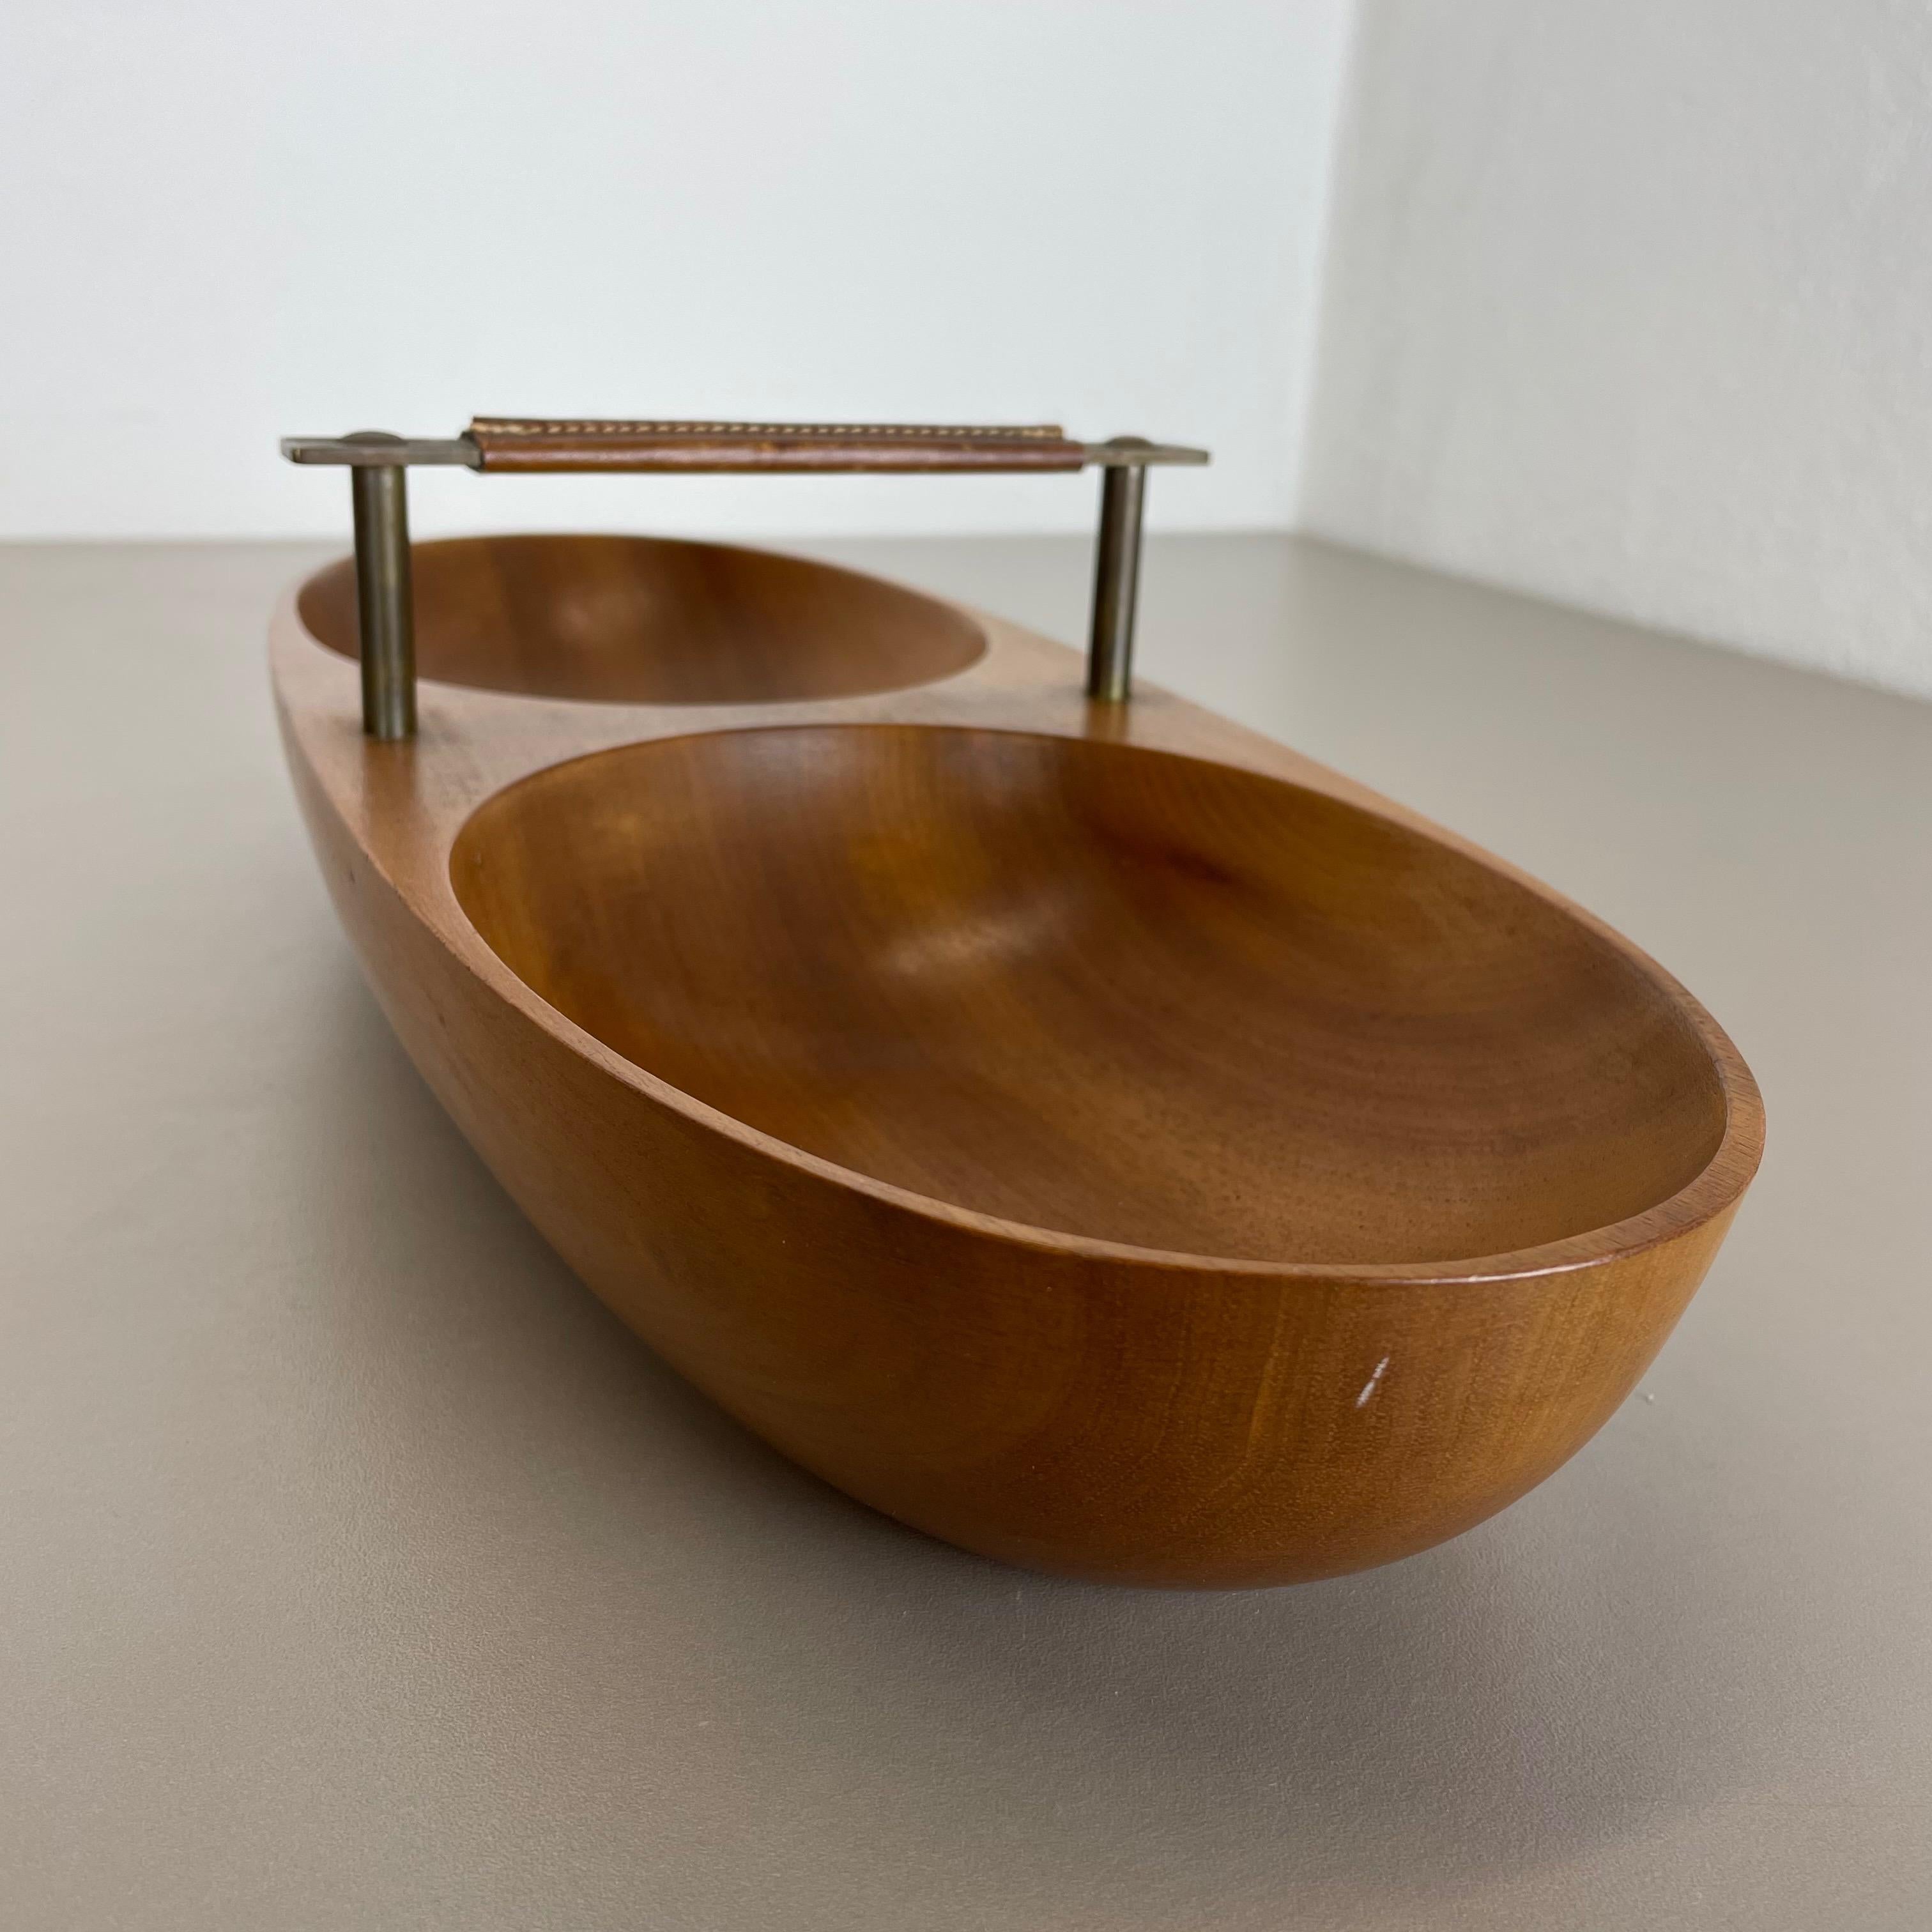 Large Light Teak Bowl with Brass and Leather Handle by Carl Auböck Austria, 1950 For Sale 2